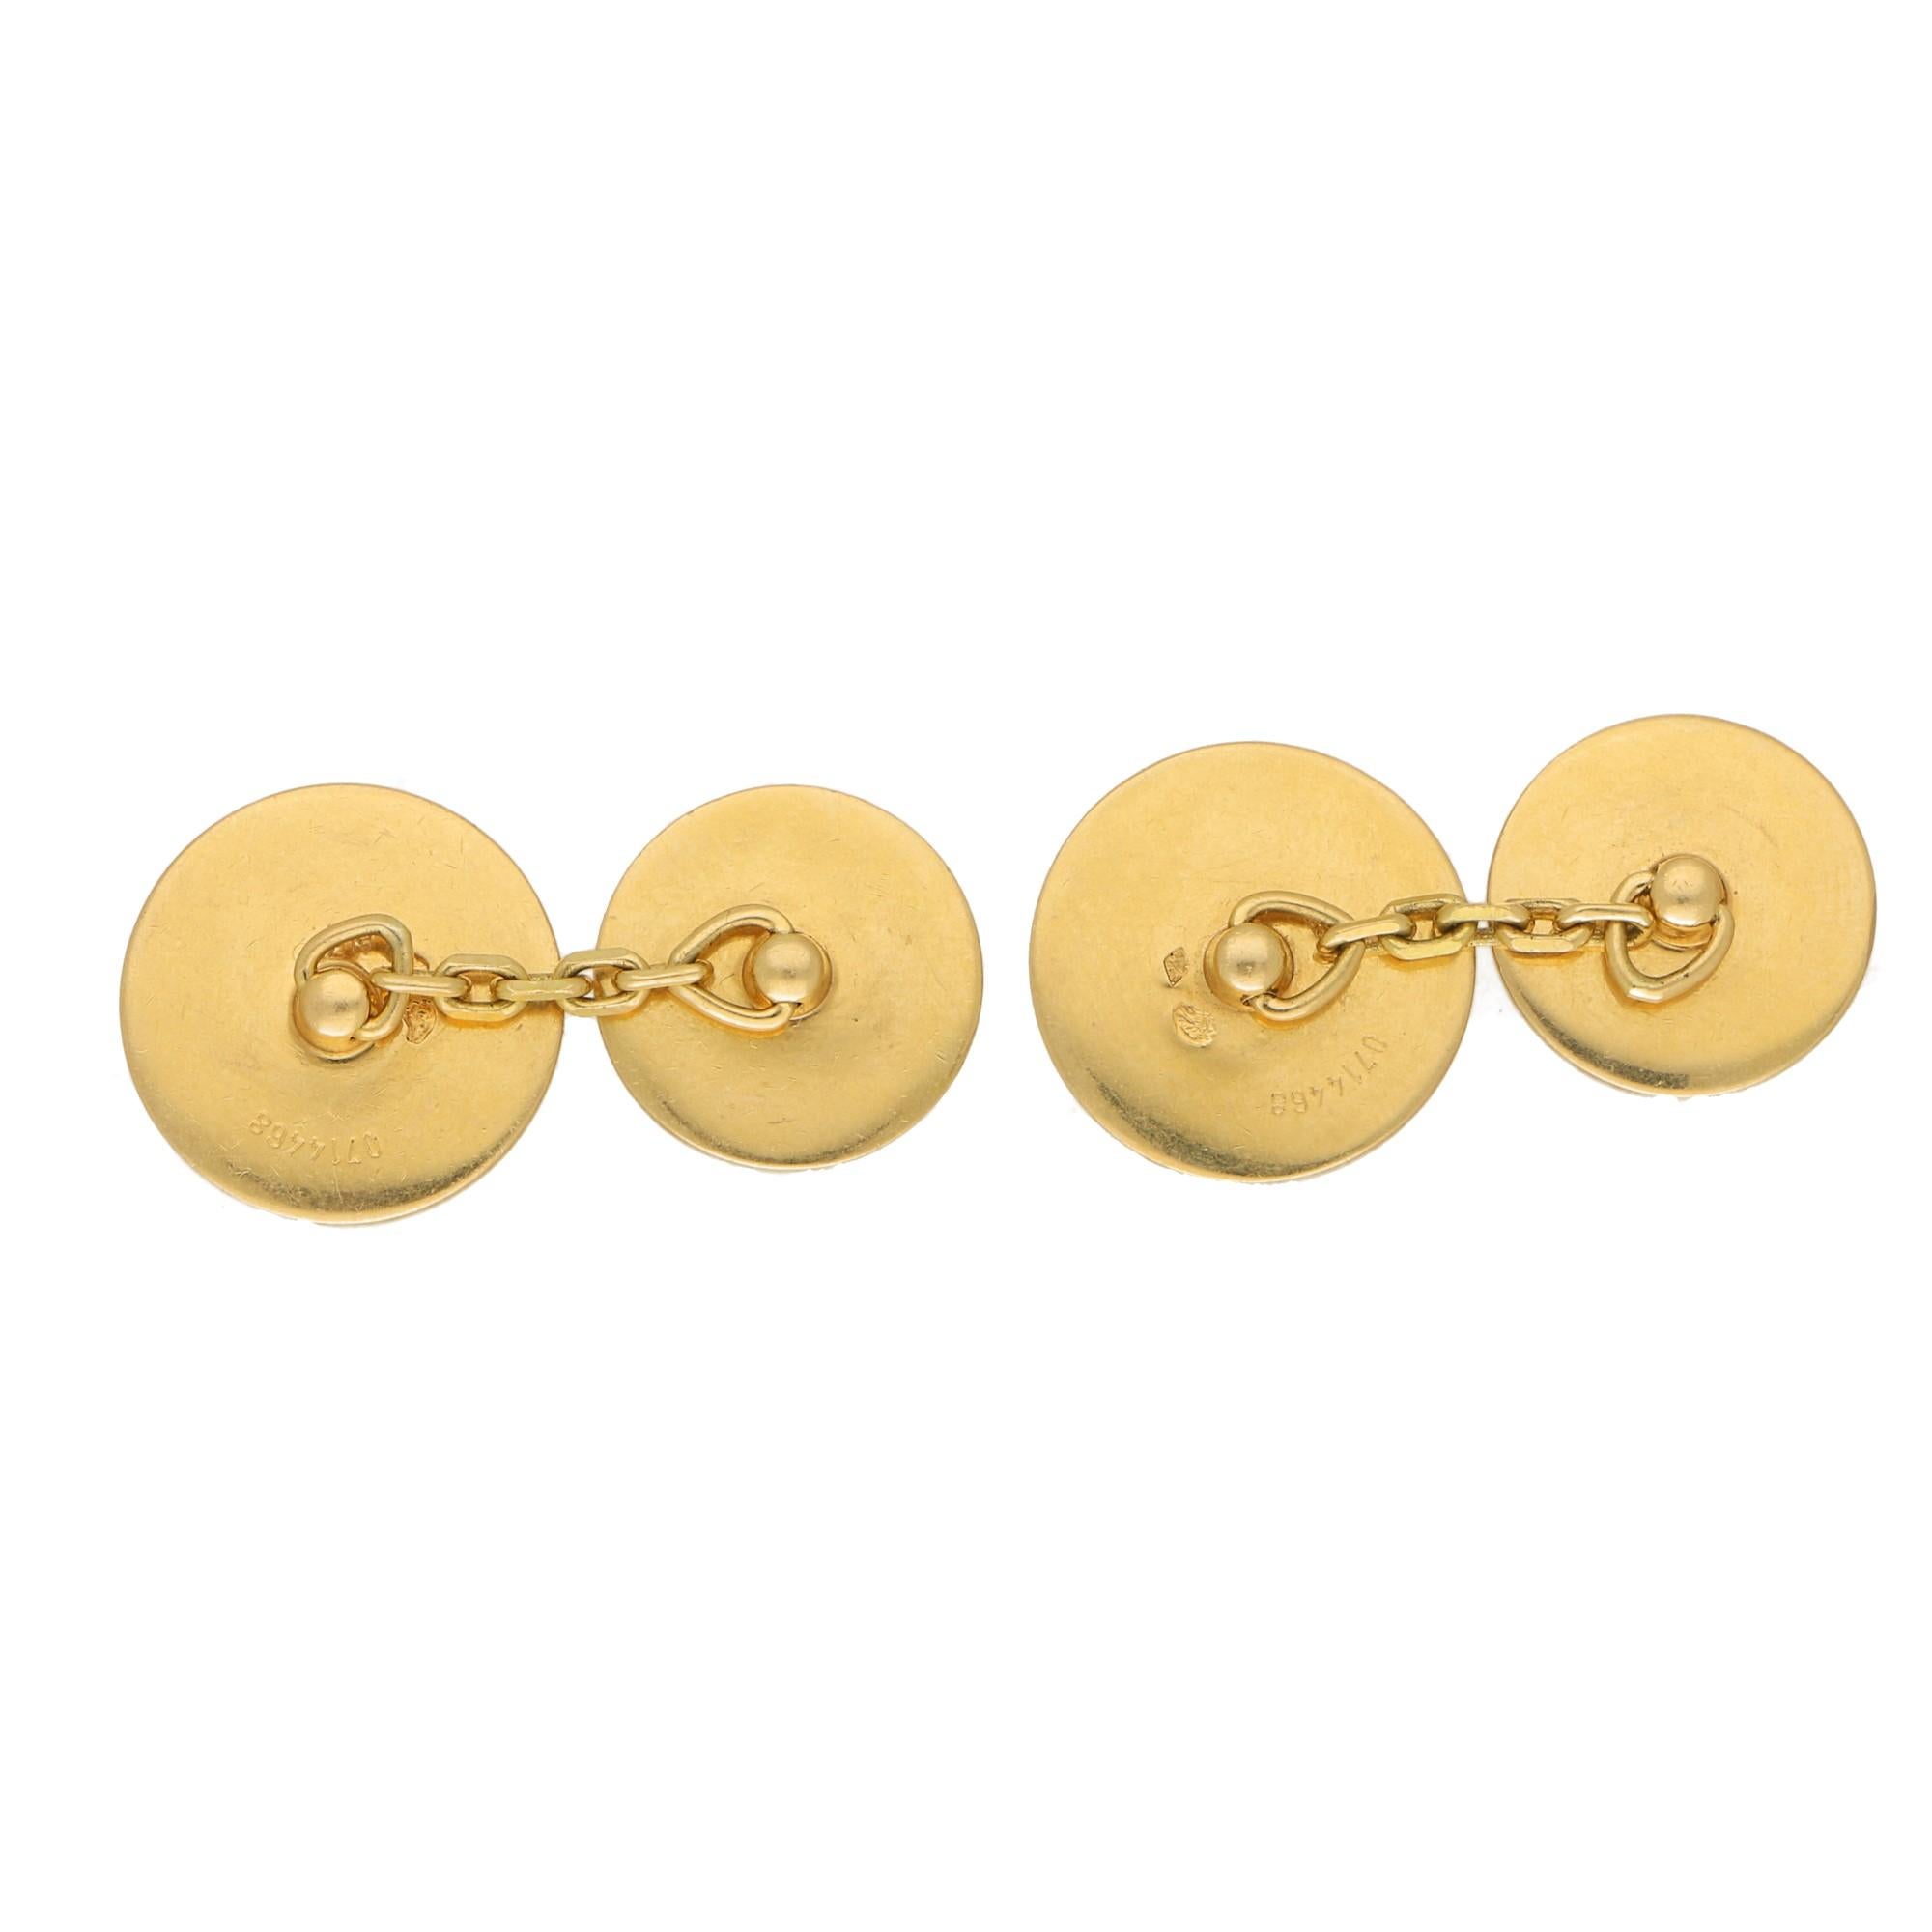 A lovely pair of signature Hermes button cufflinks set in solid 18k yellow gold. 

Each cufflink is composed of two round plaques and are each engraved with the Hermes logo. The round plaques are attached to each other by a secure chain fitting.